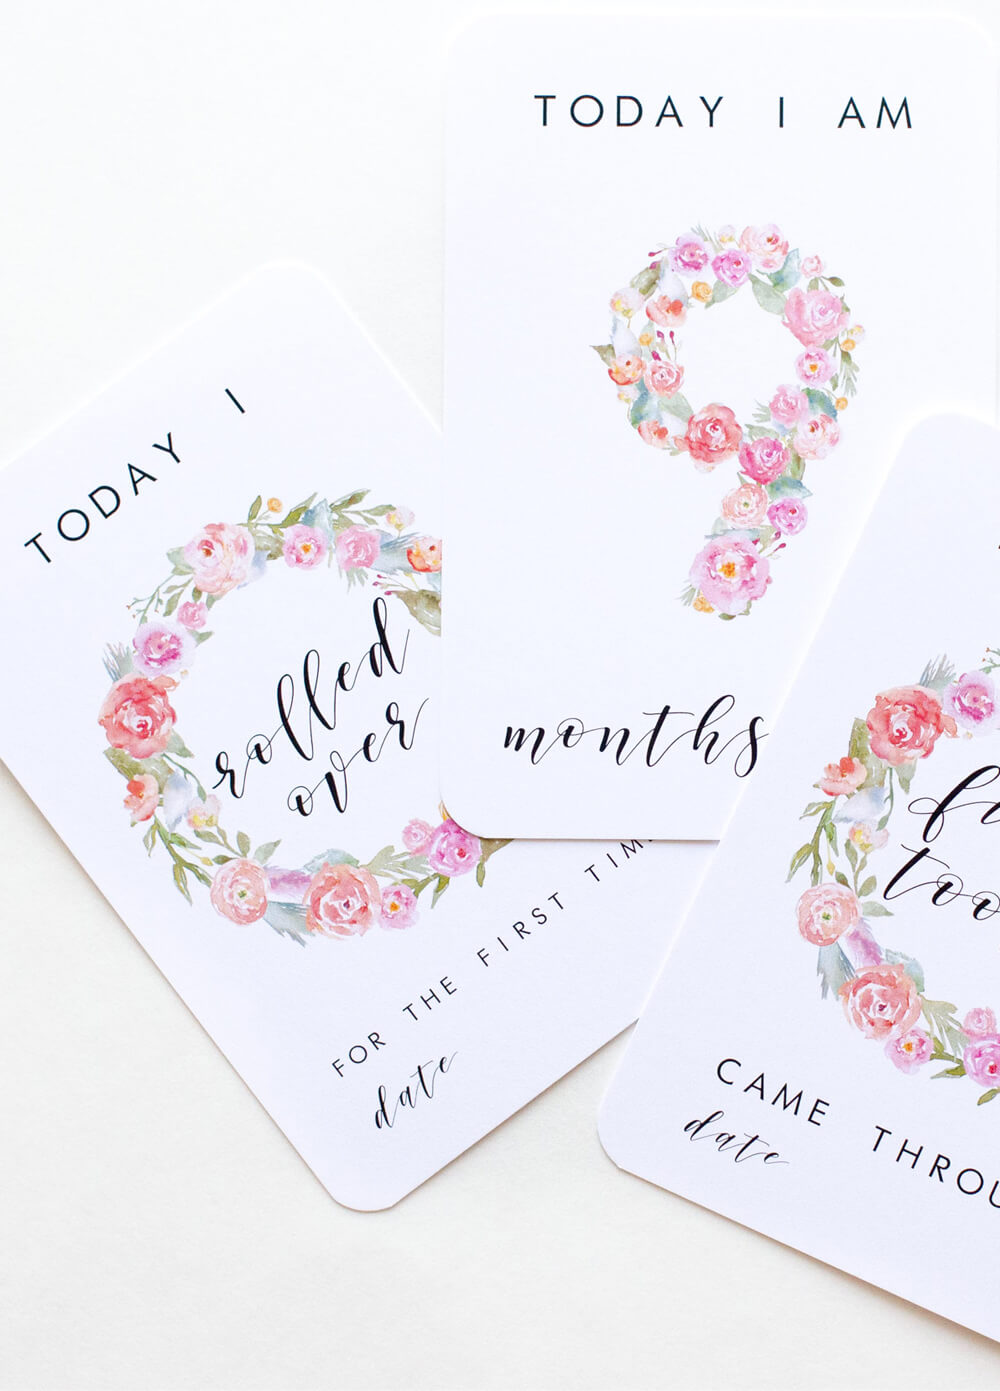 Baby Girl Milestone Cards in Posey Design by Blossom & Pear